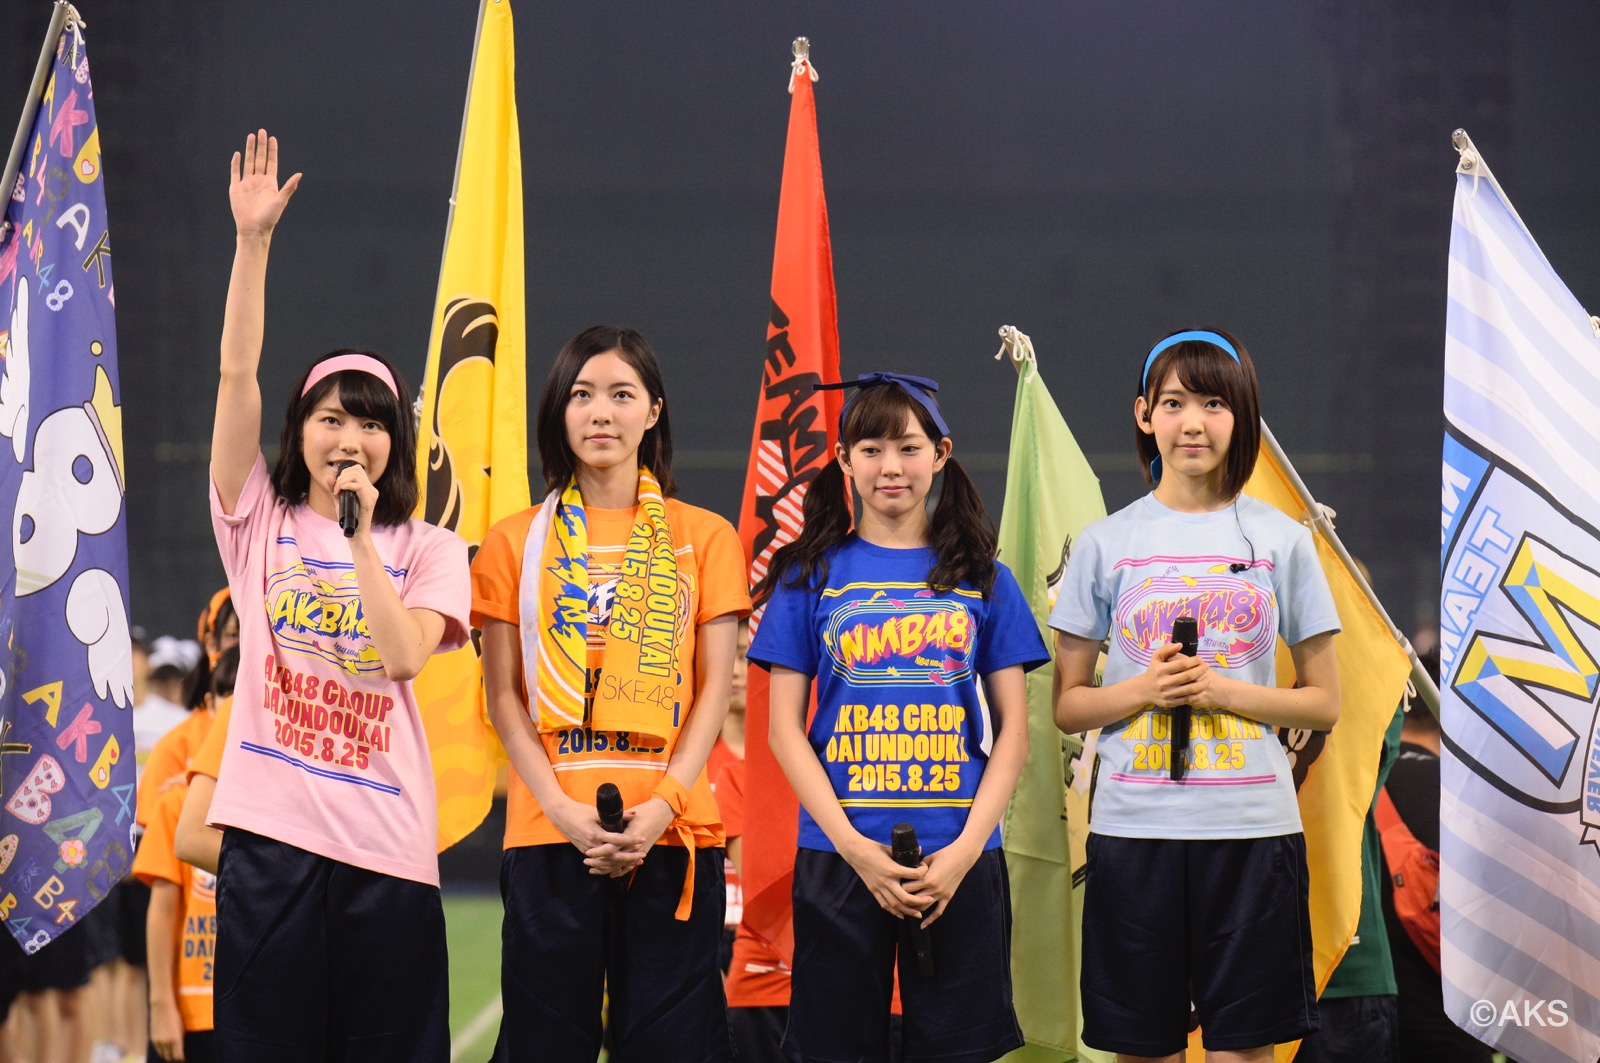 Team 8 Excels in 7 Events to Win the 1st AKB48 Group Sports Day!